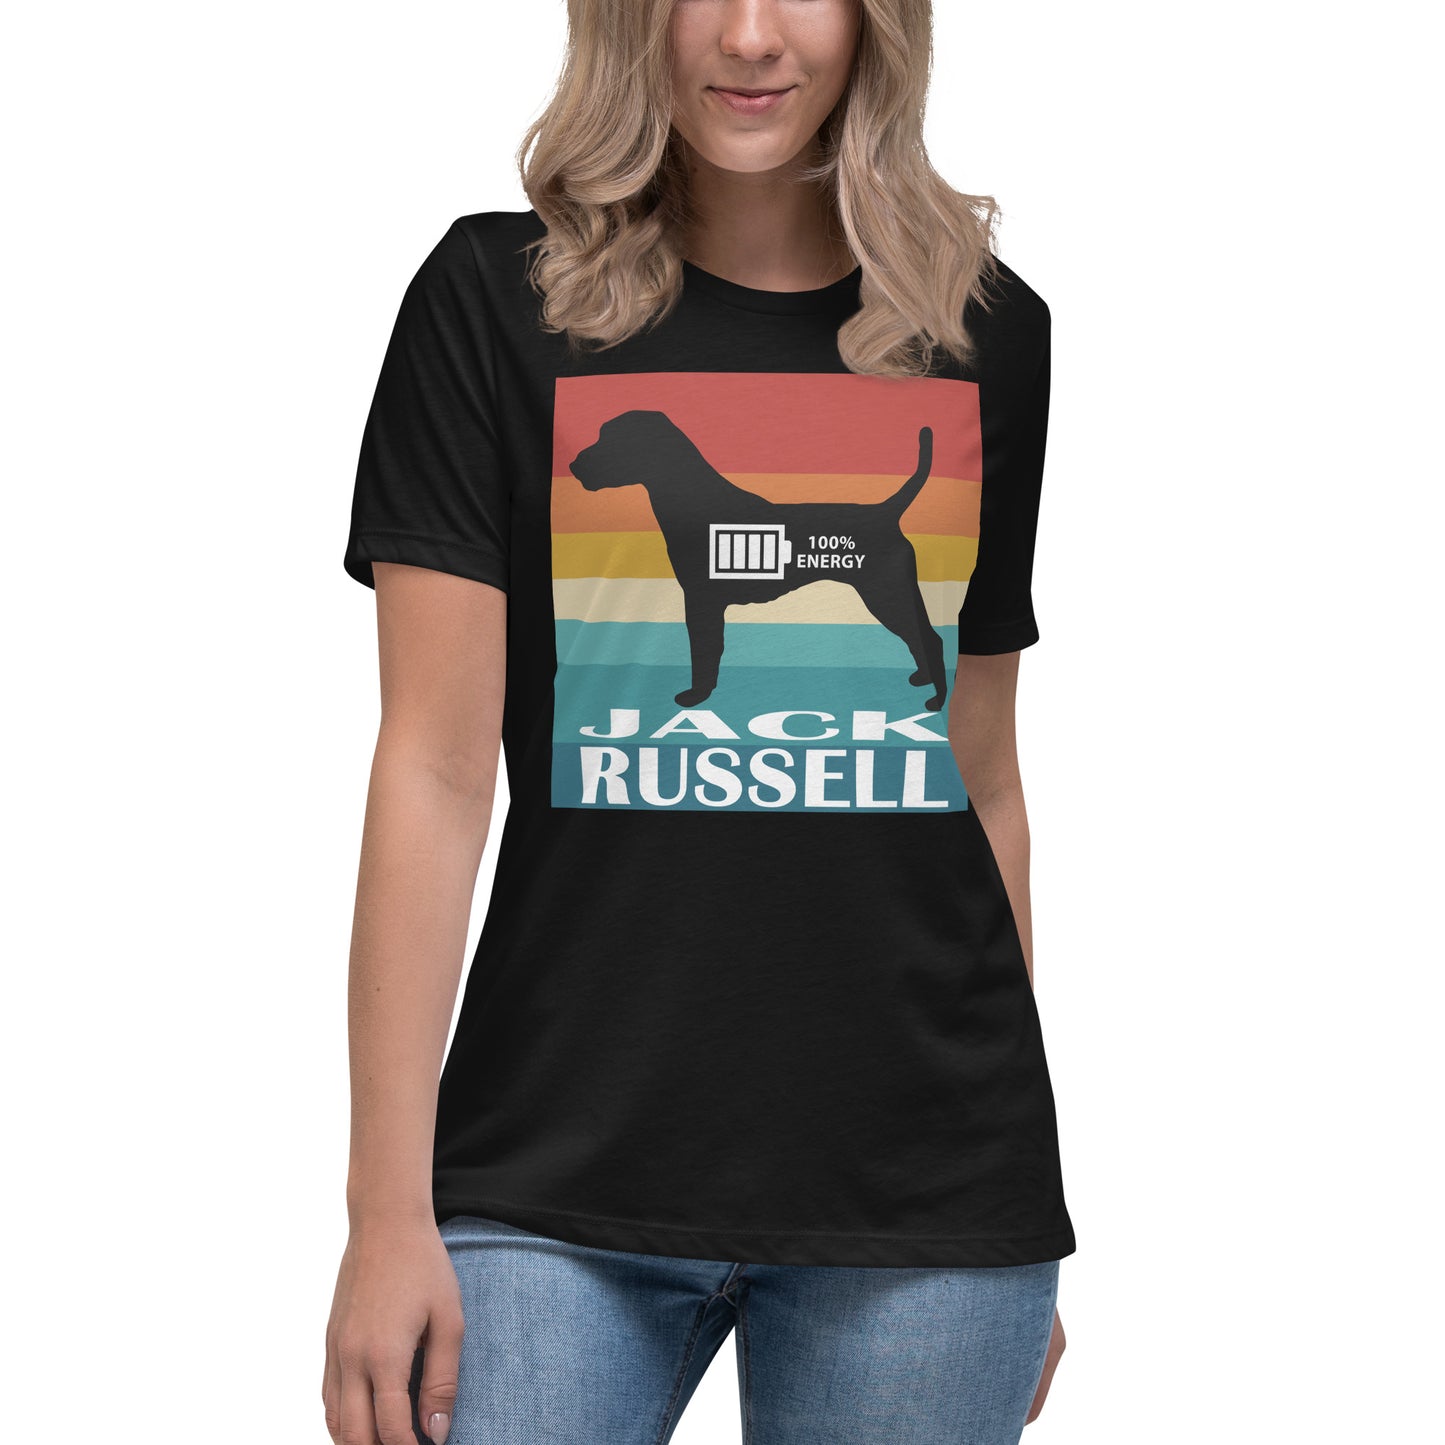 Jack Russell 100% Energy Women's Relaxed T-Shirt by Dog Artistry